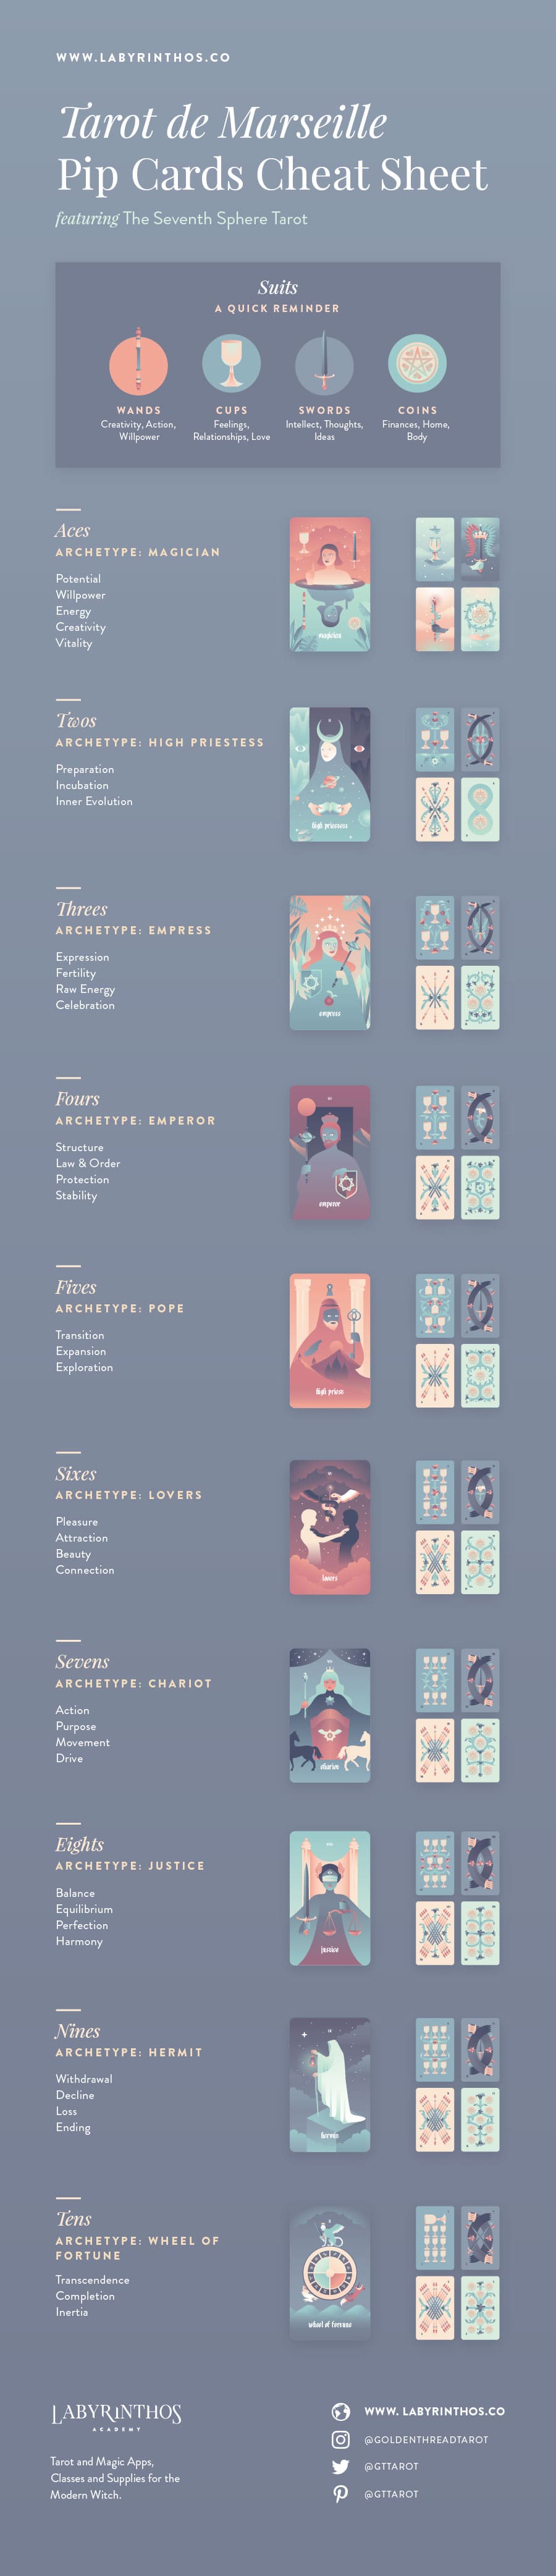 The Minor Arcana of the Tarot de Marseille: A System of Understanding Pip Cards - Full Infographic 